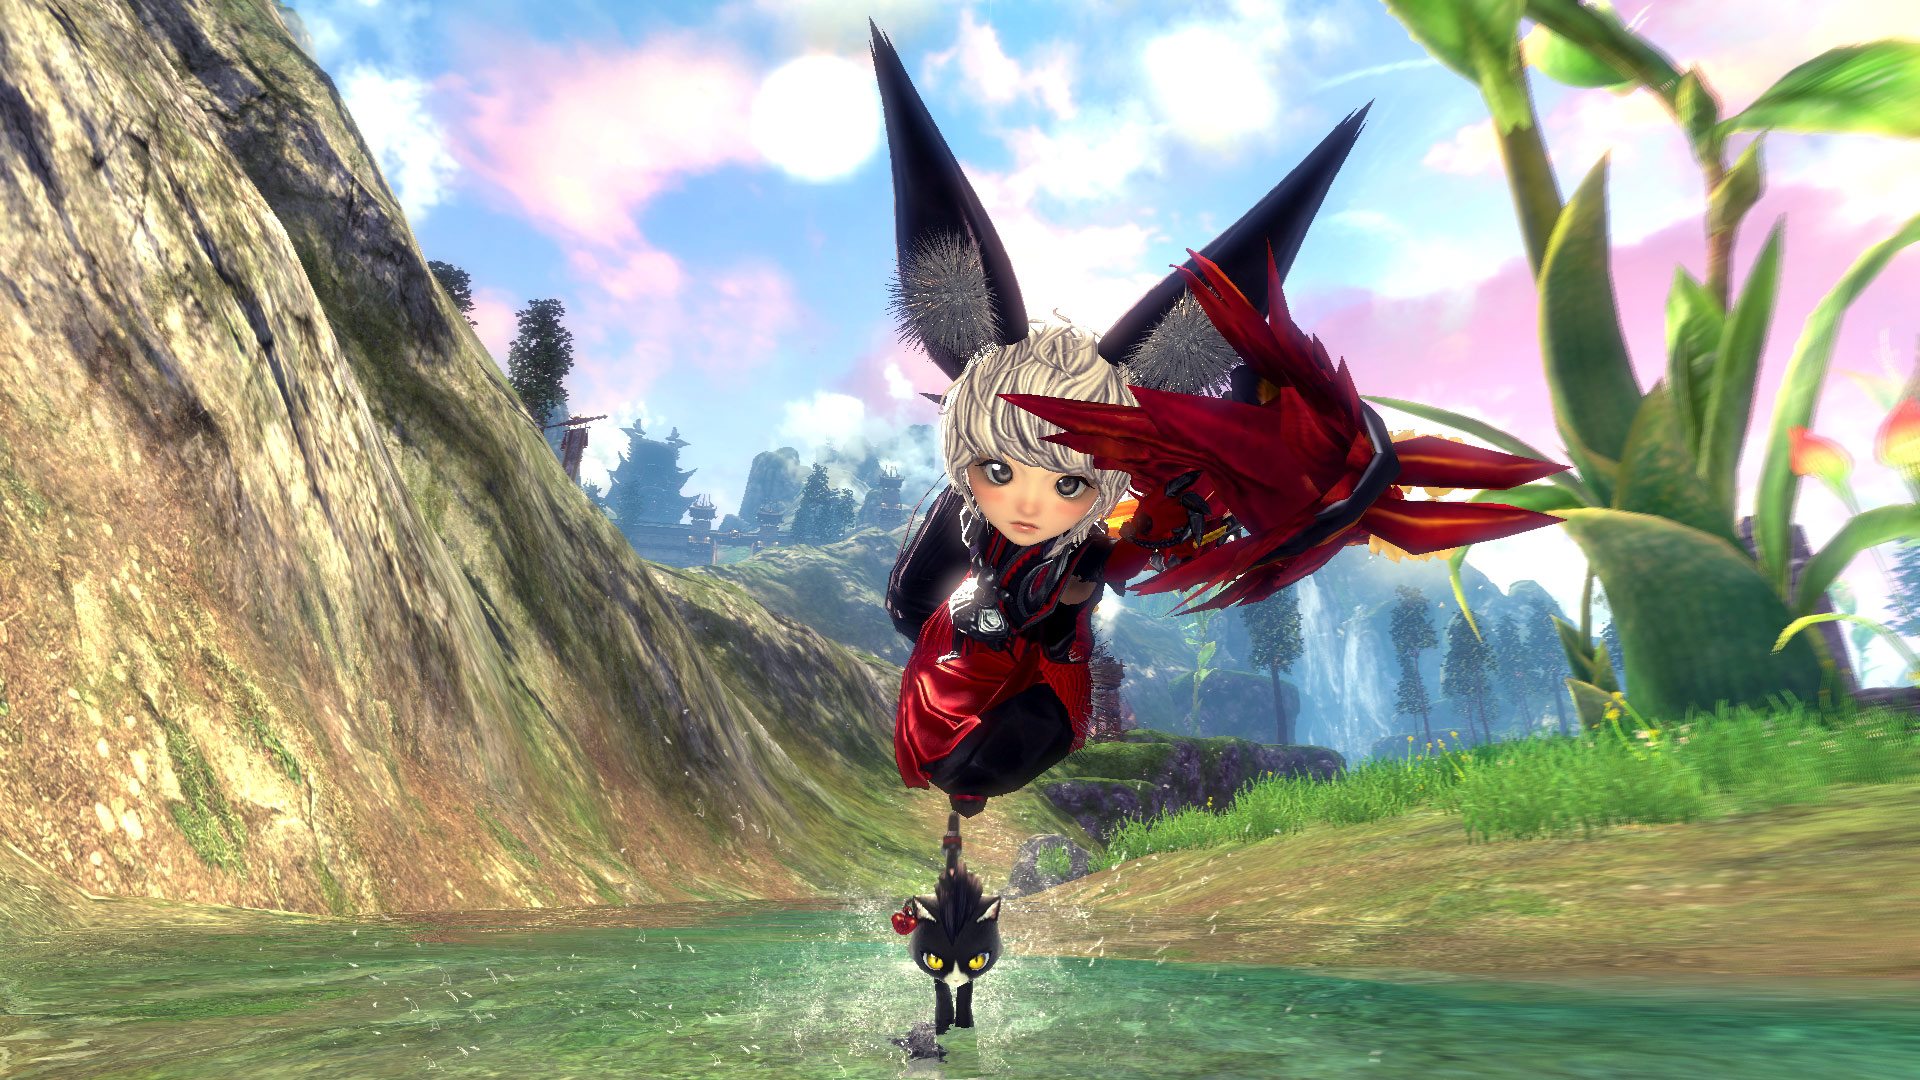 Blade&Soul: Revolution release a flurry of events in Mischief Makers Update